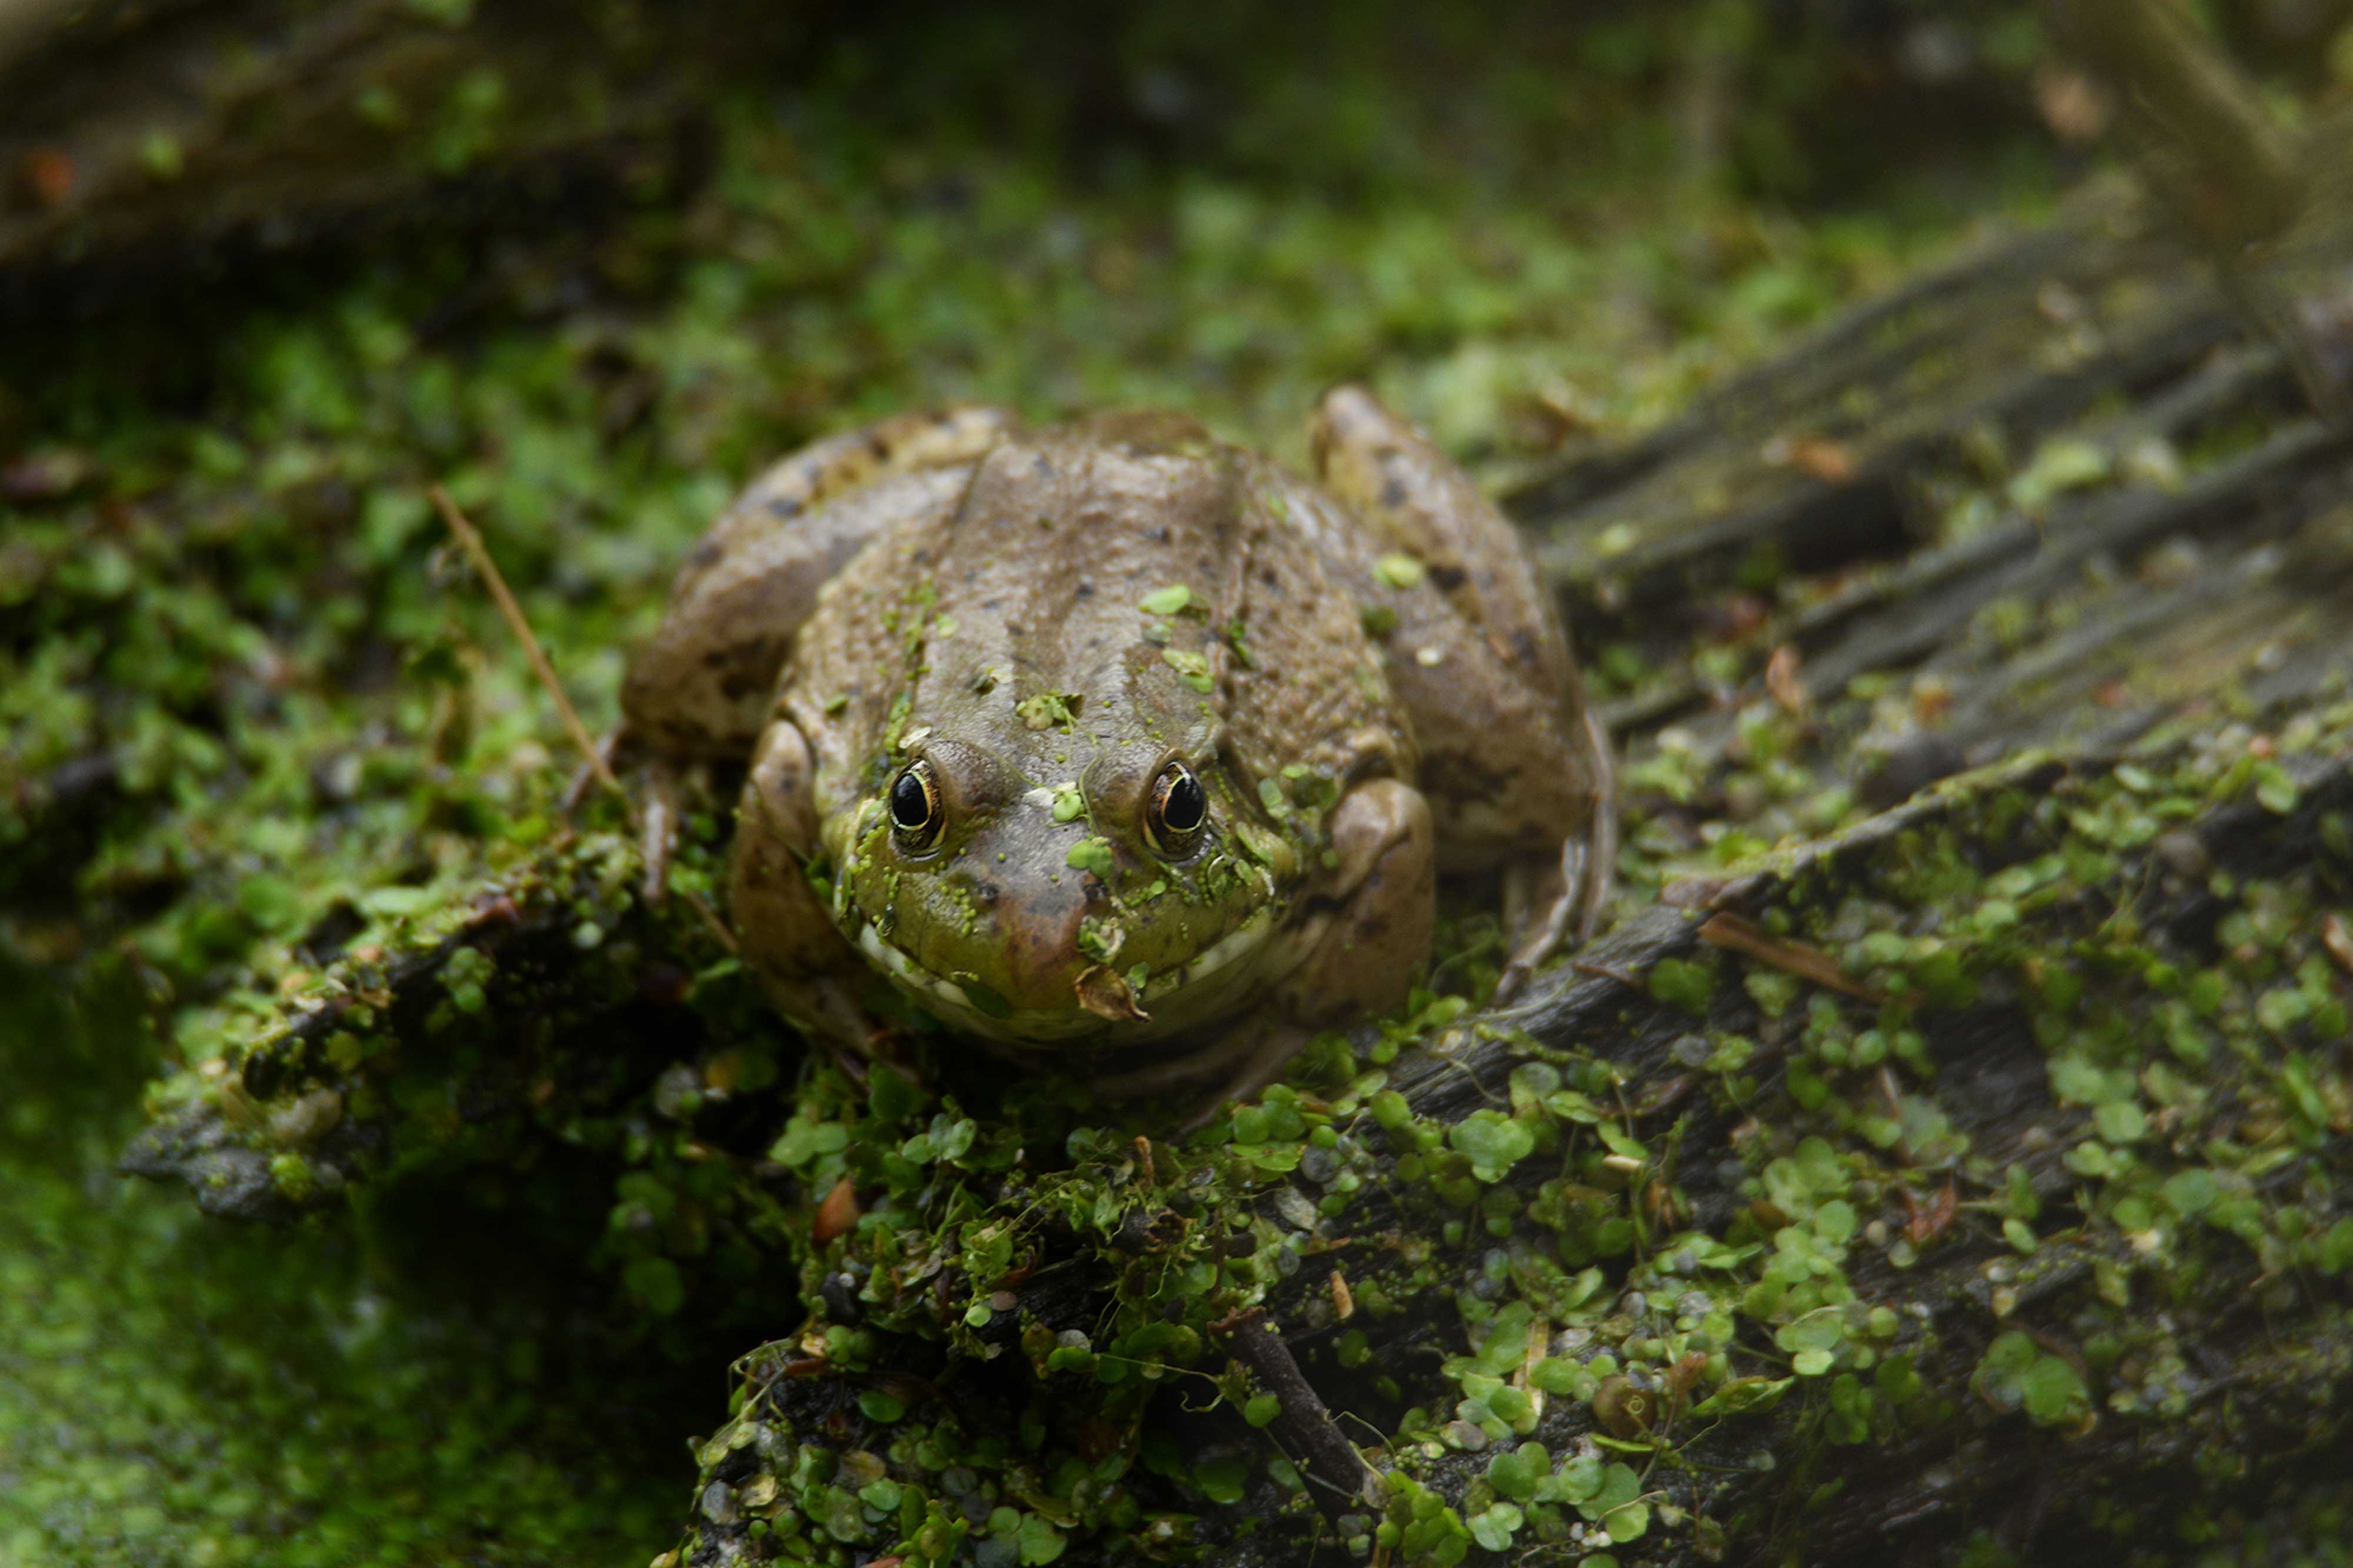 A green frog sitting on a log.